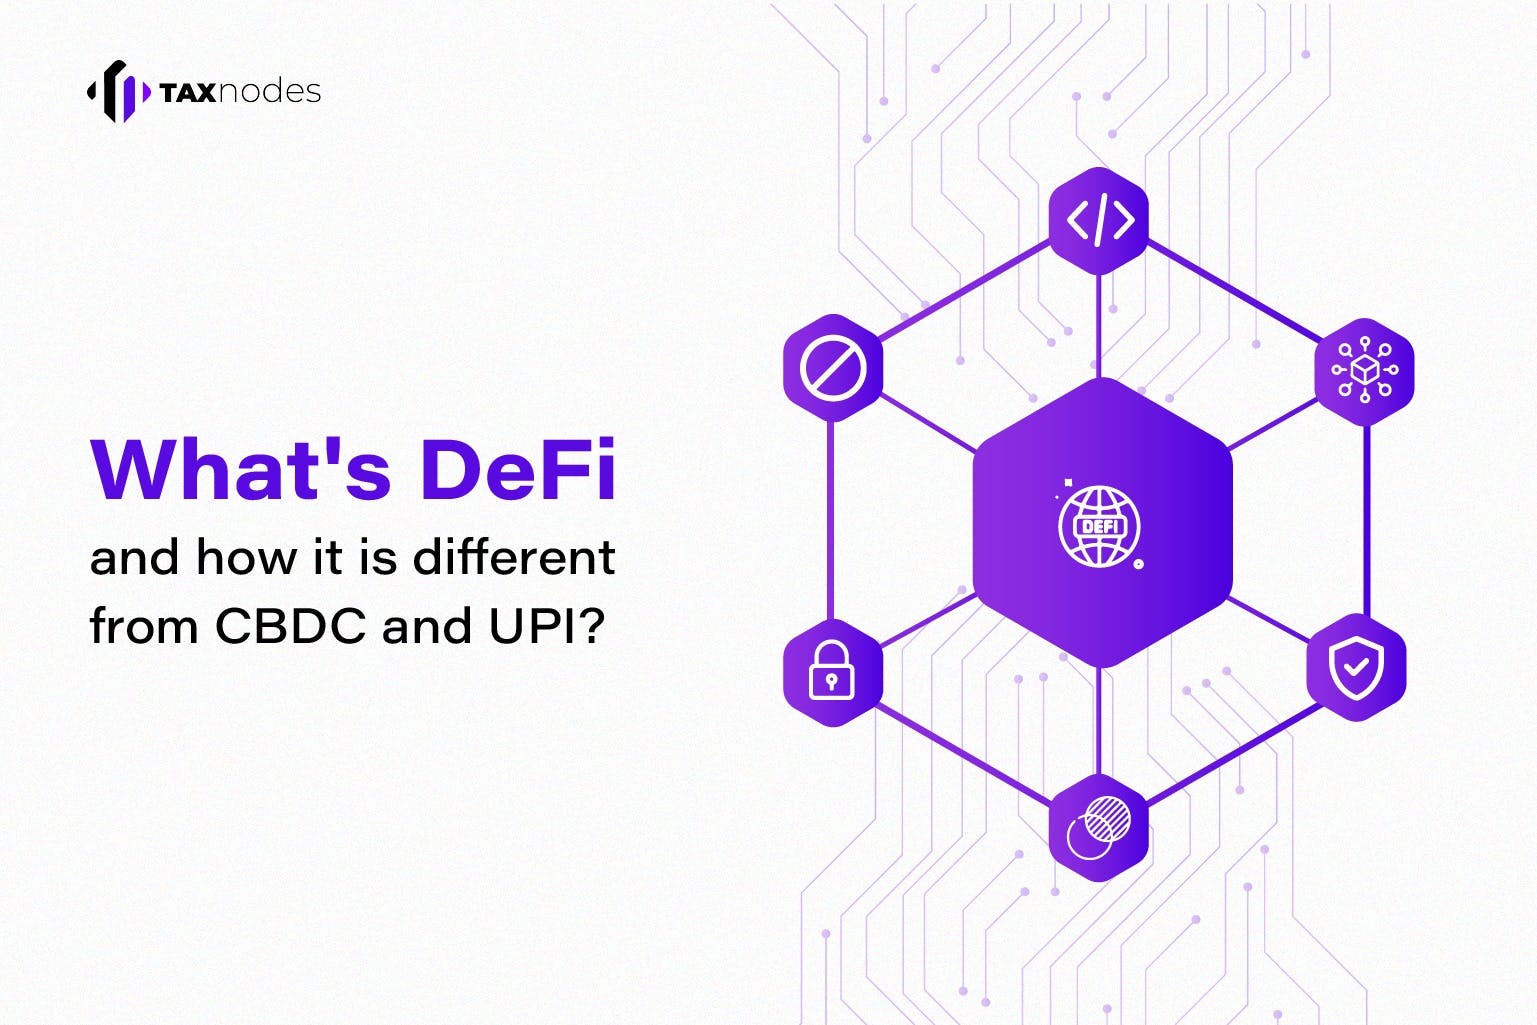 Explained Gains and Liquidity in DeFi